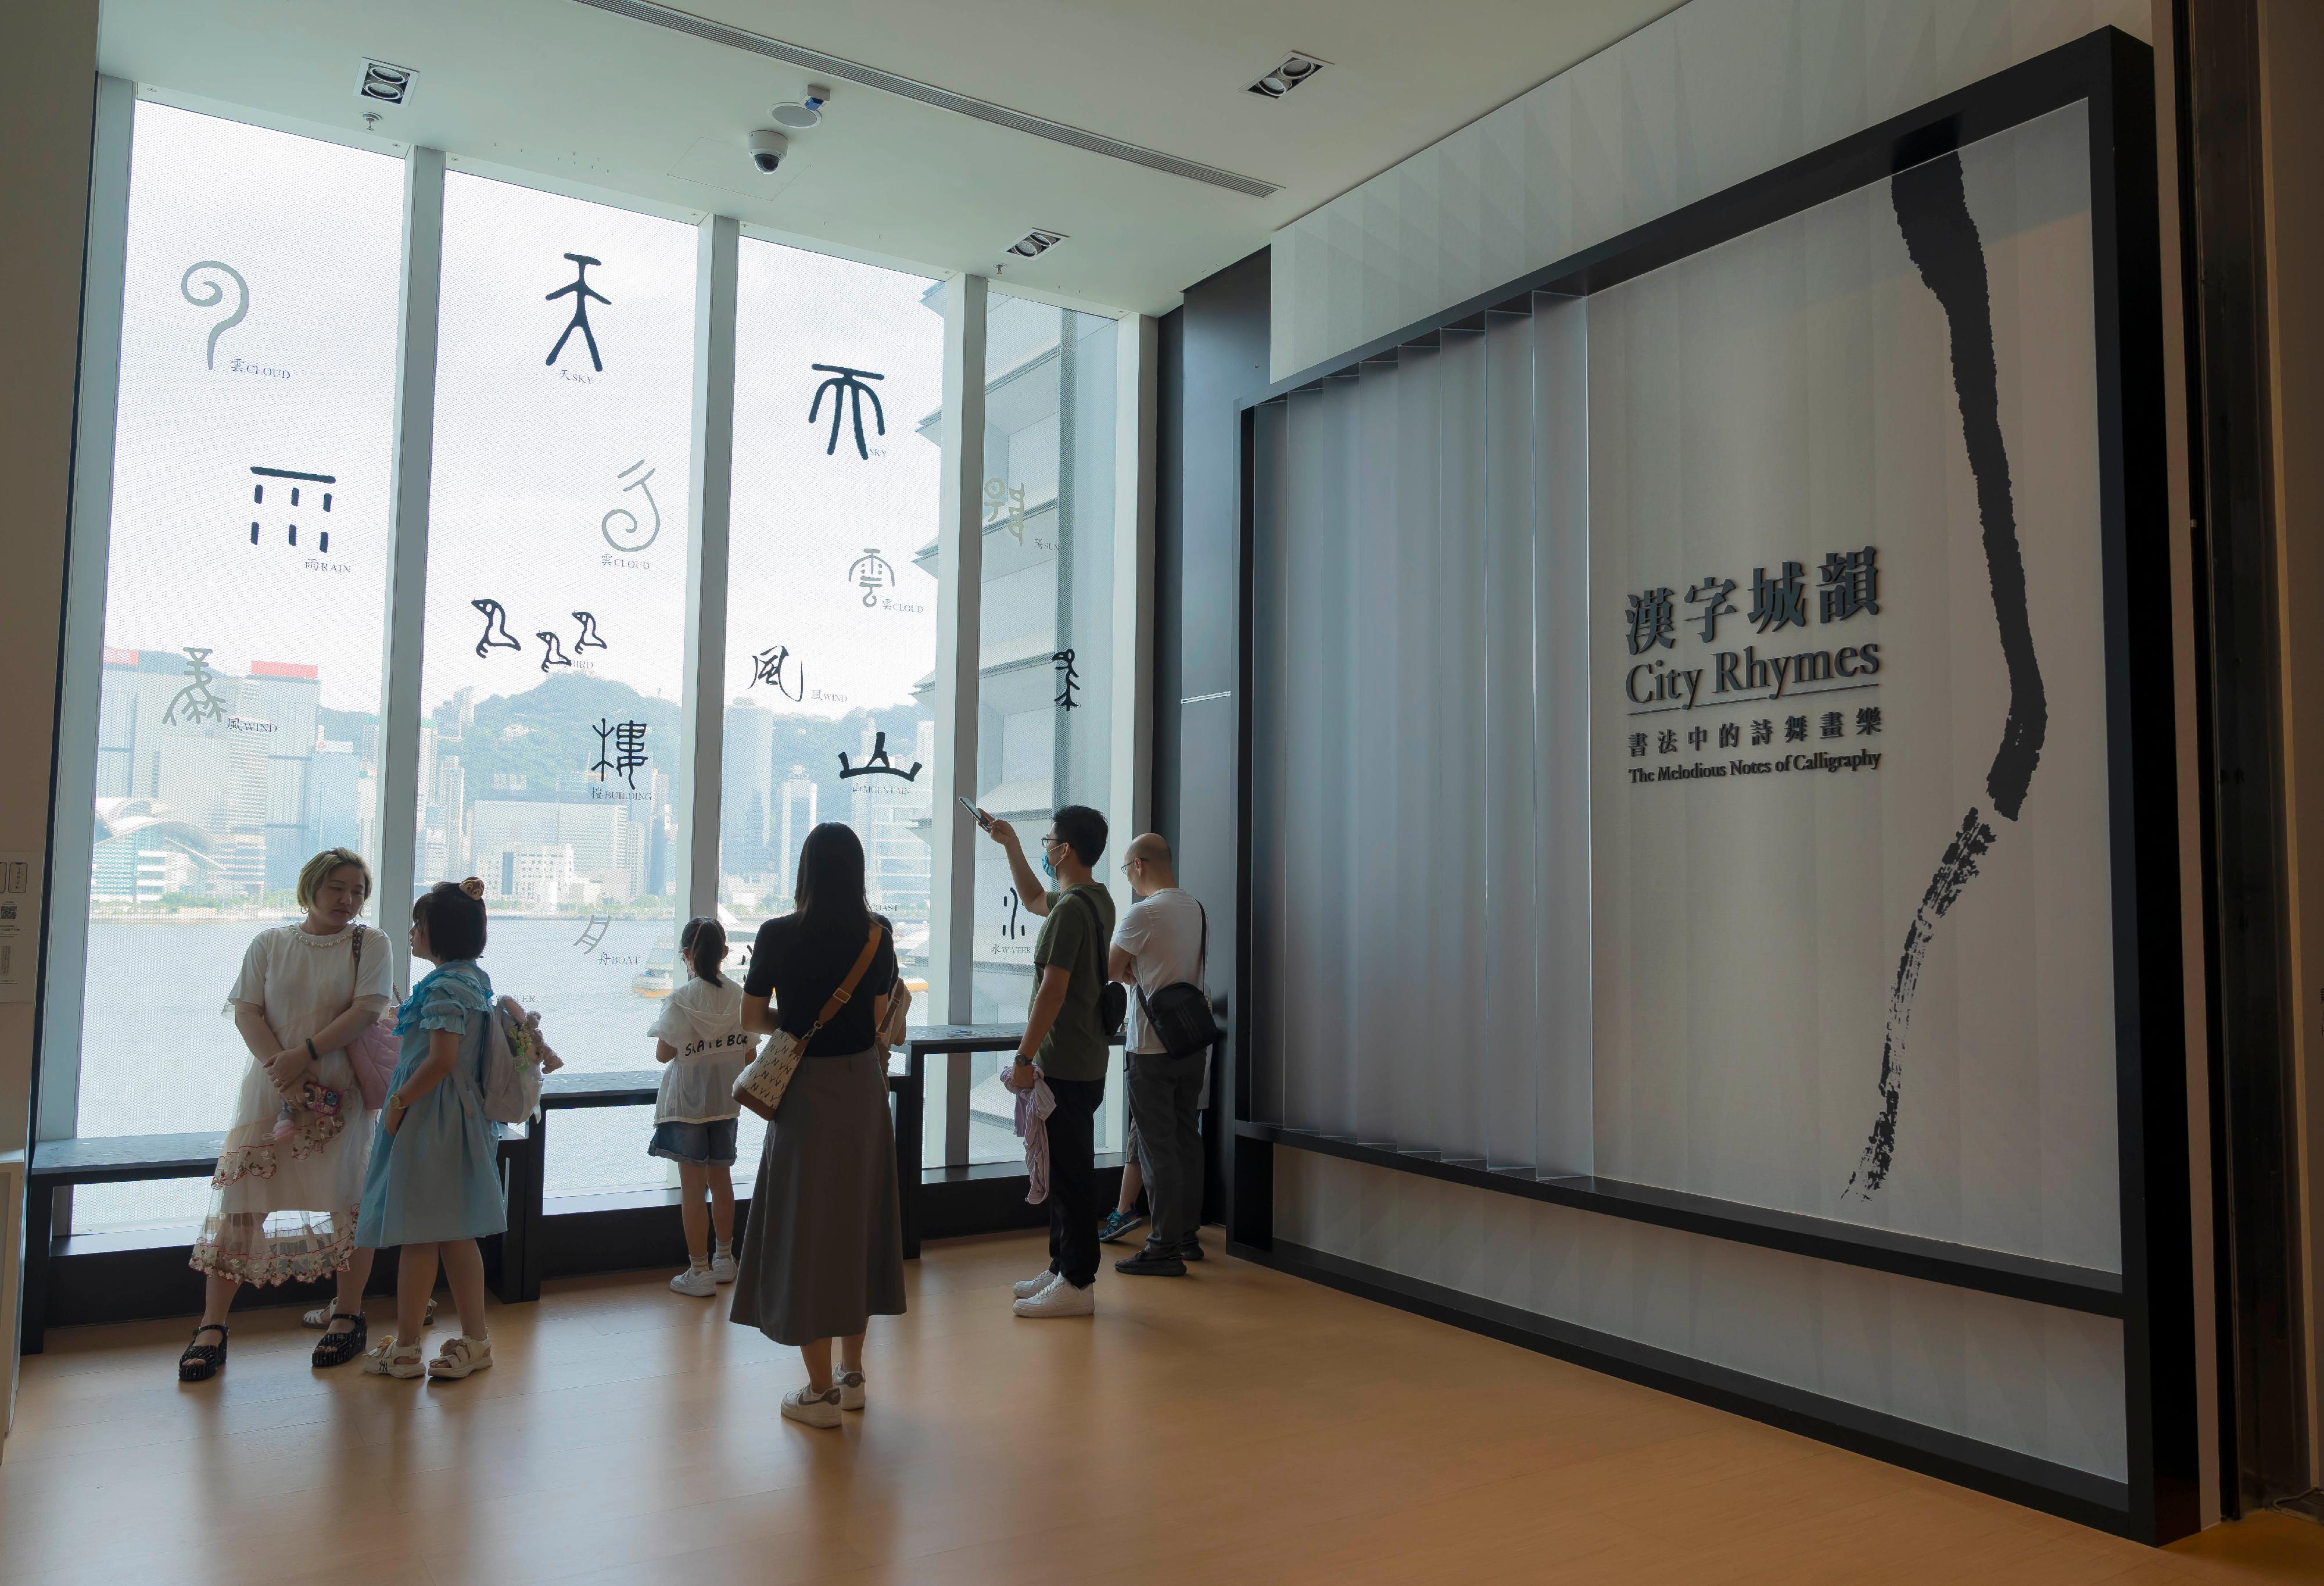 The Hong Kong Museum of Art (HKMoA) of the Leisure and Cultural Services Department has been popular among the local public and tourists. The number of visitors has reached a new high since its reopening after a major renovation in 2019 and the HKMoA welcomed its 2,000,000th visitor today (August 12). Picture shows visitors touring the exhibition.

